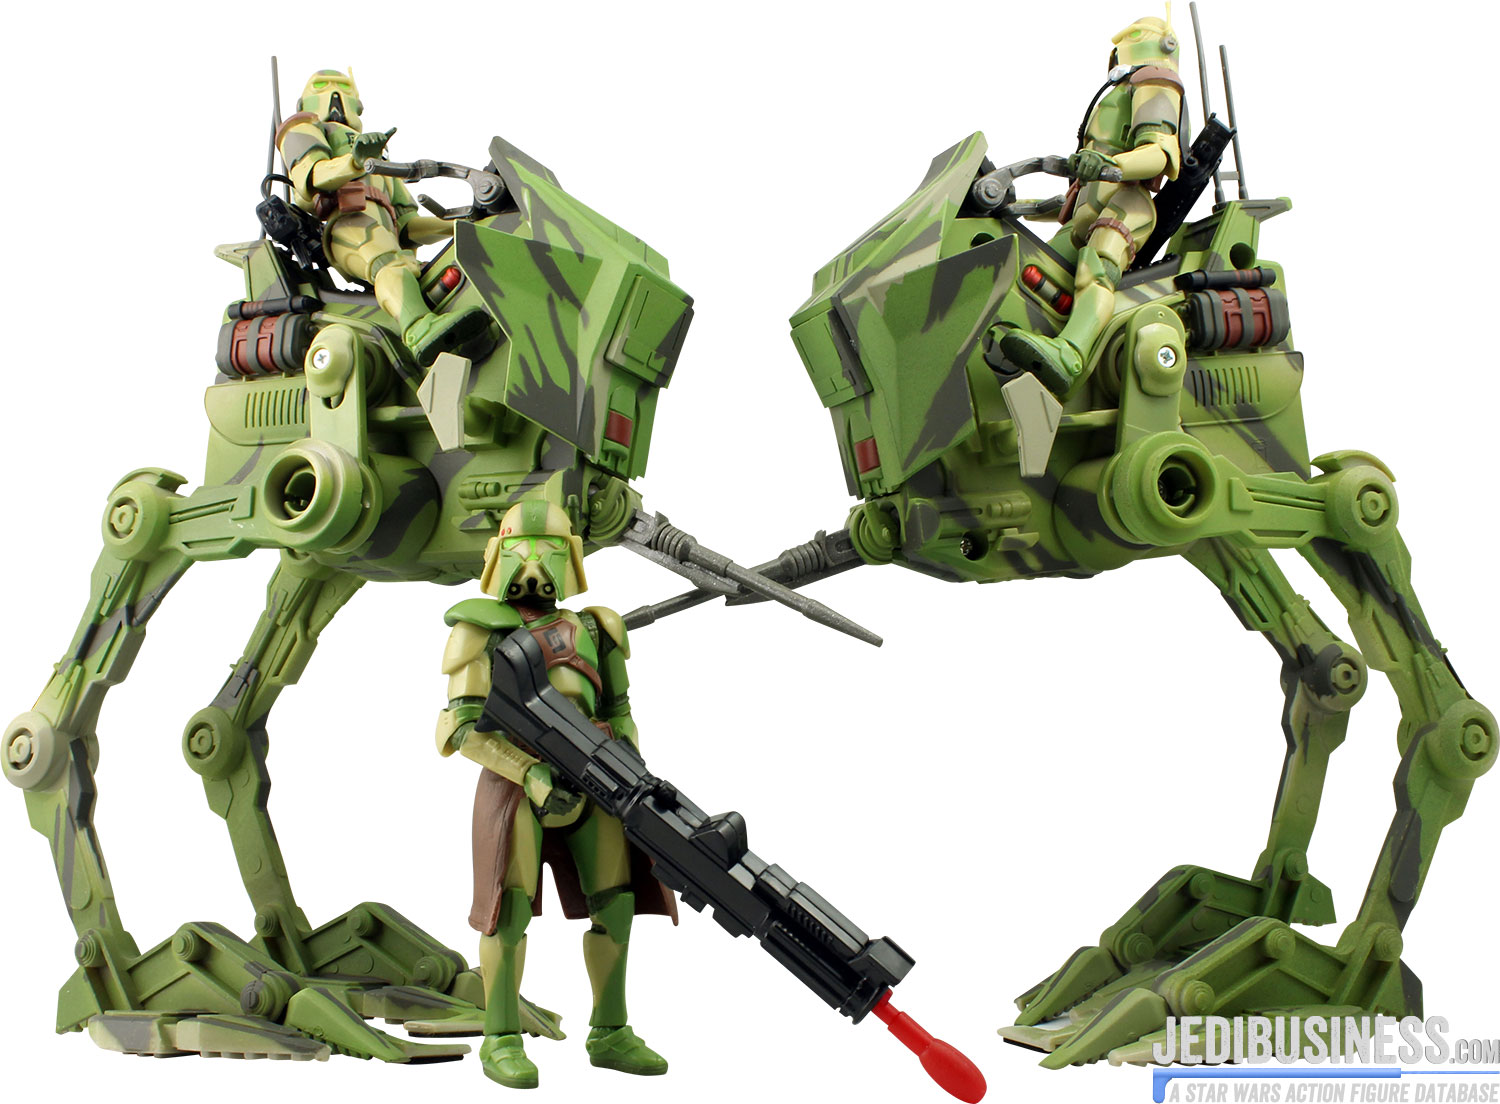 AT-RT Driver AT-RT Assault Squad 3-Pack